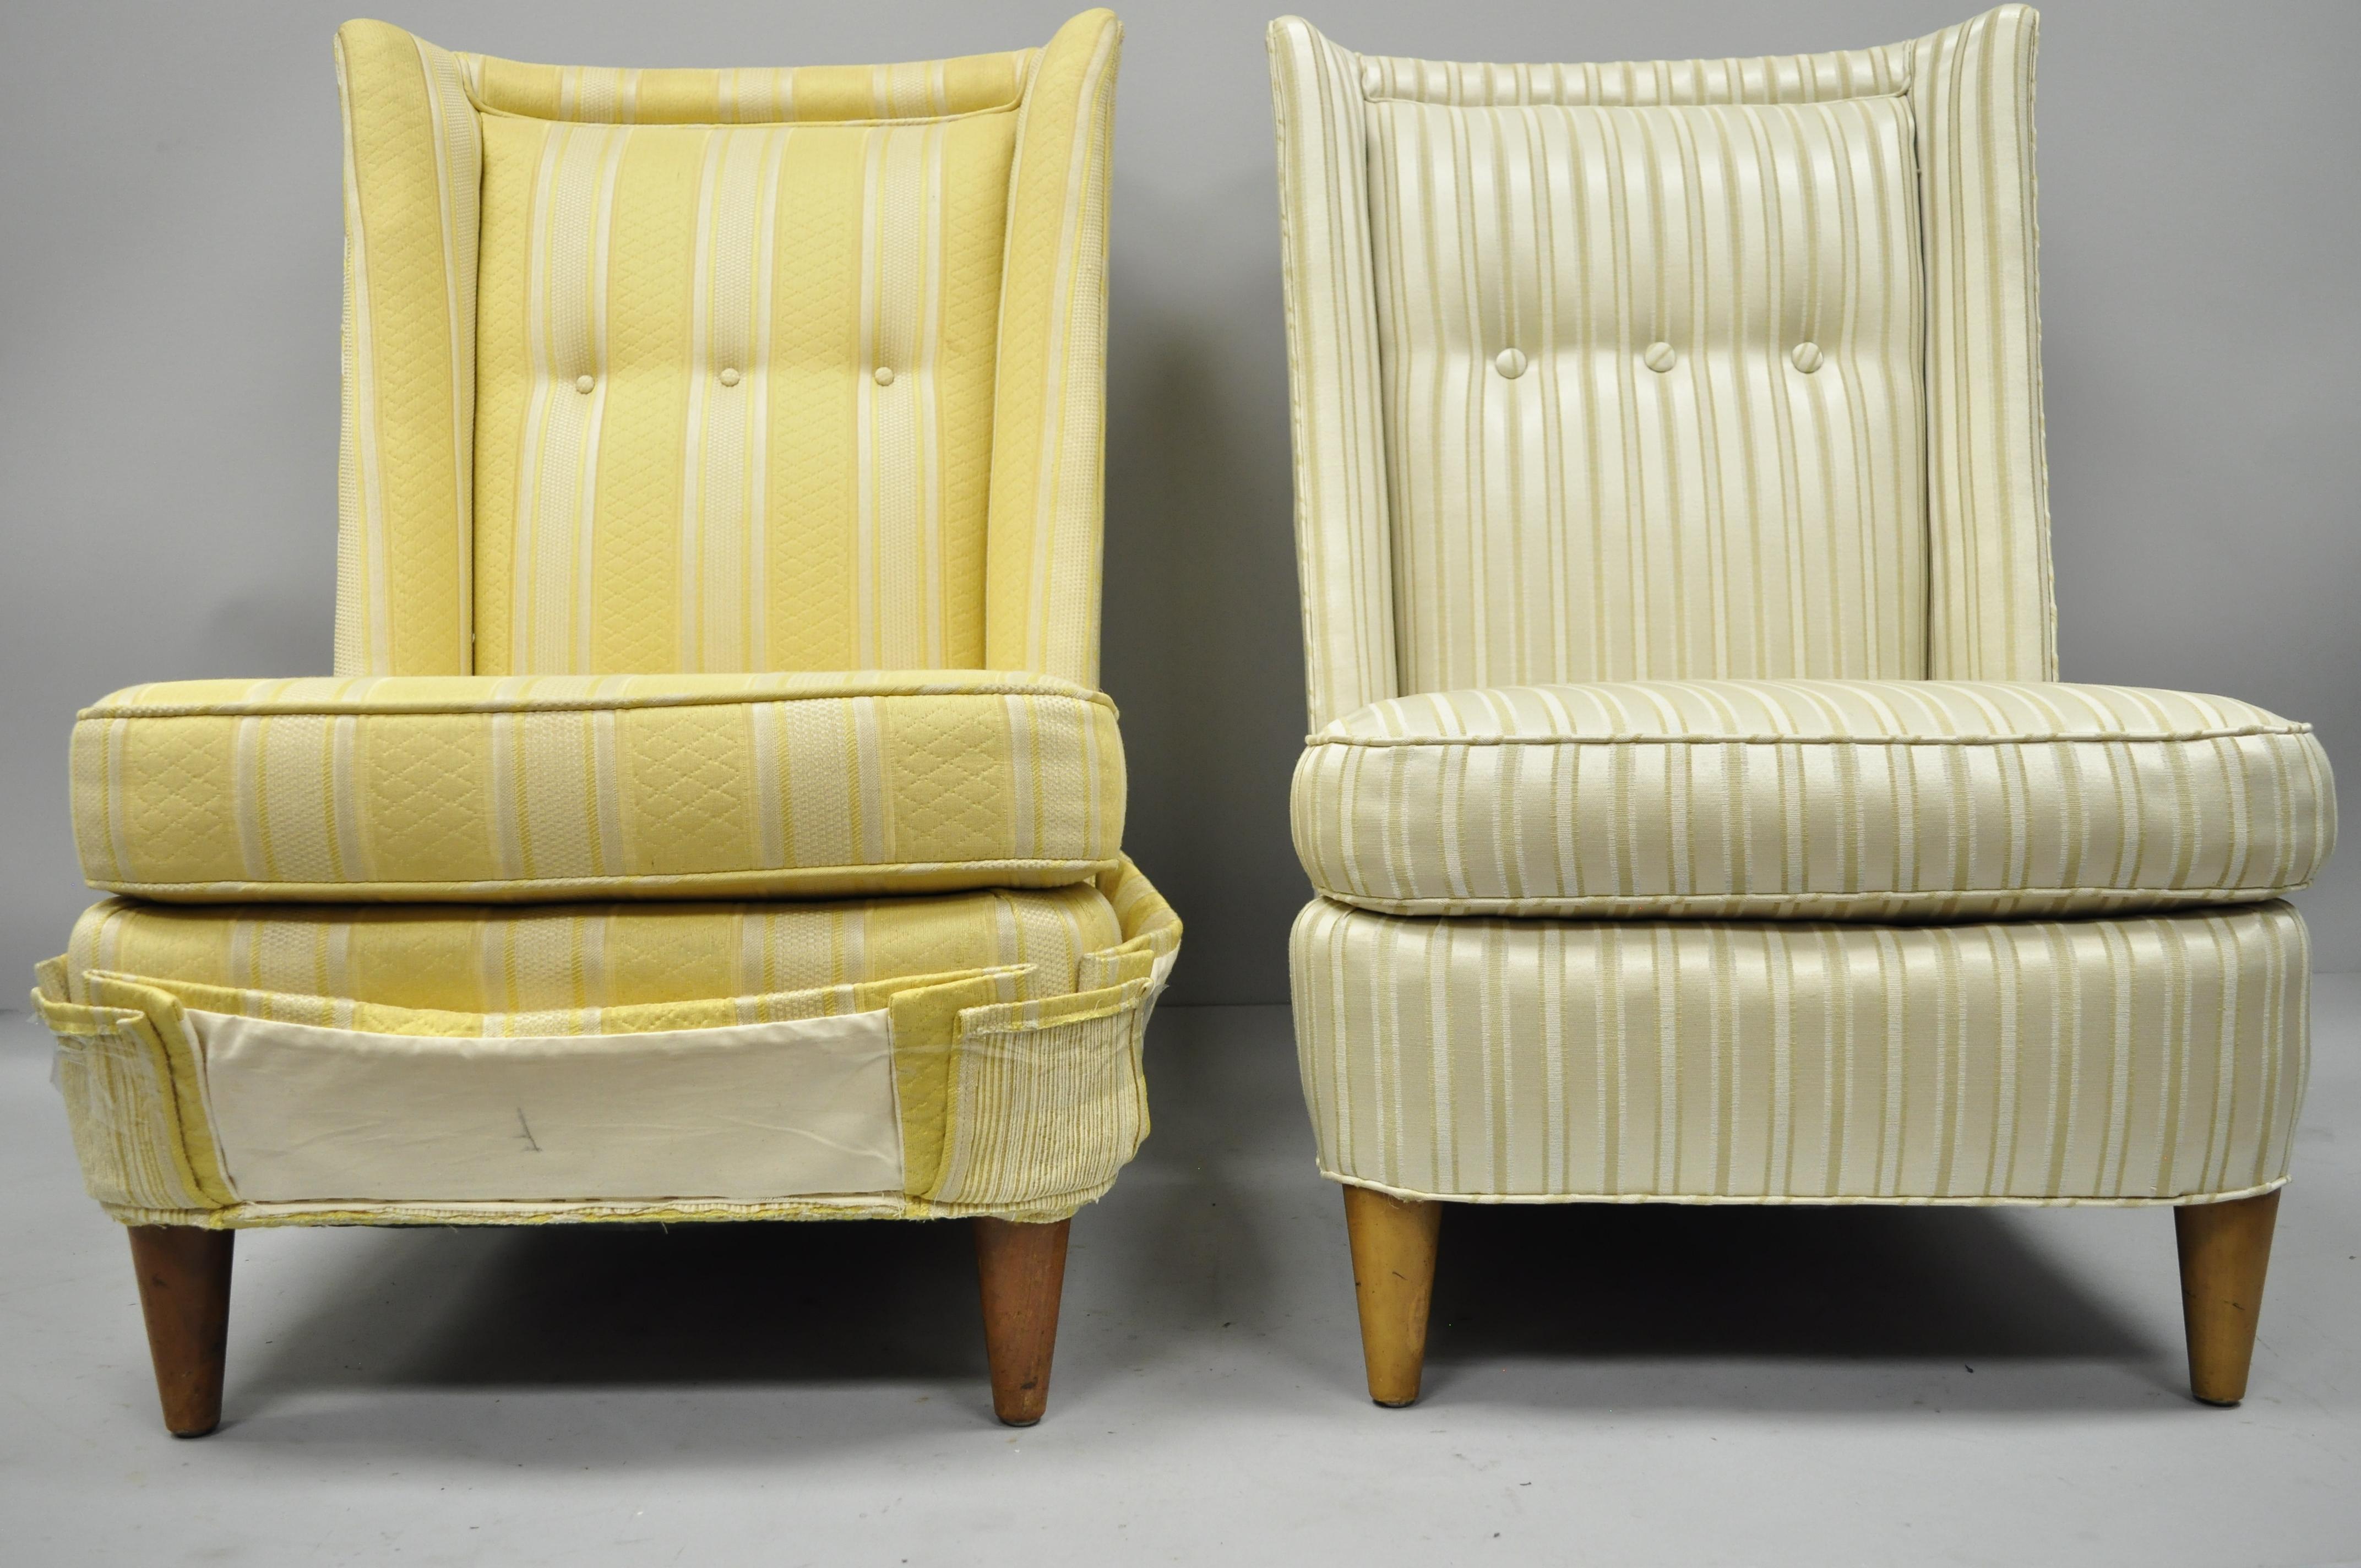 Paul Laszlo Upholstered Slipper Lounge Chair Barrel Back a Pair In Good Condition For Sale In Philadelphia, PA